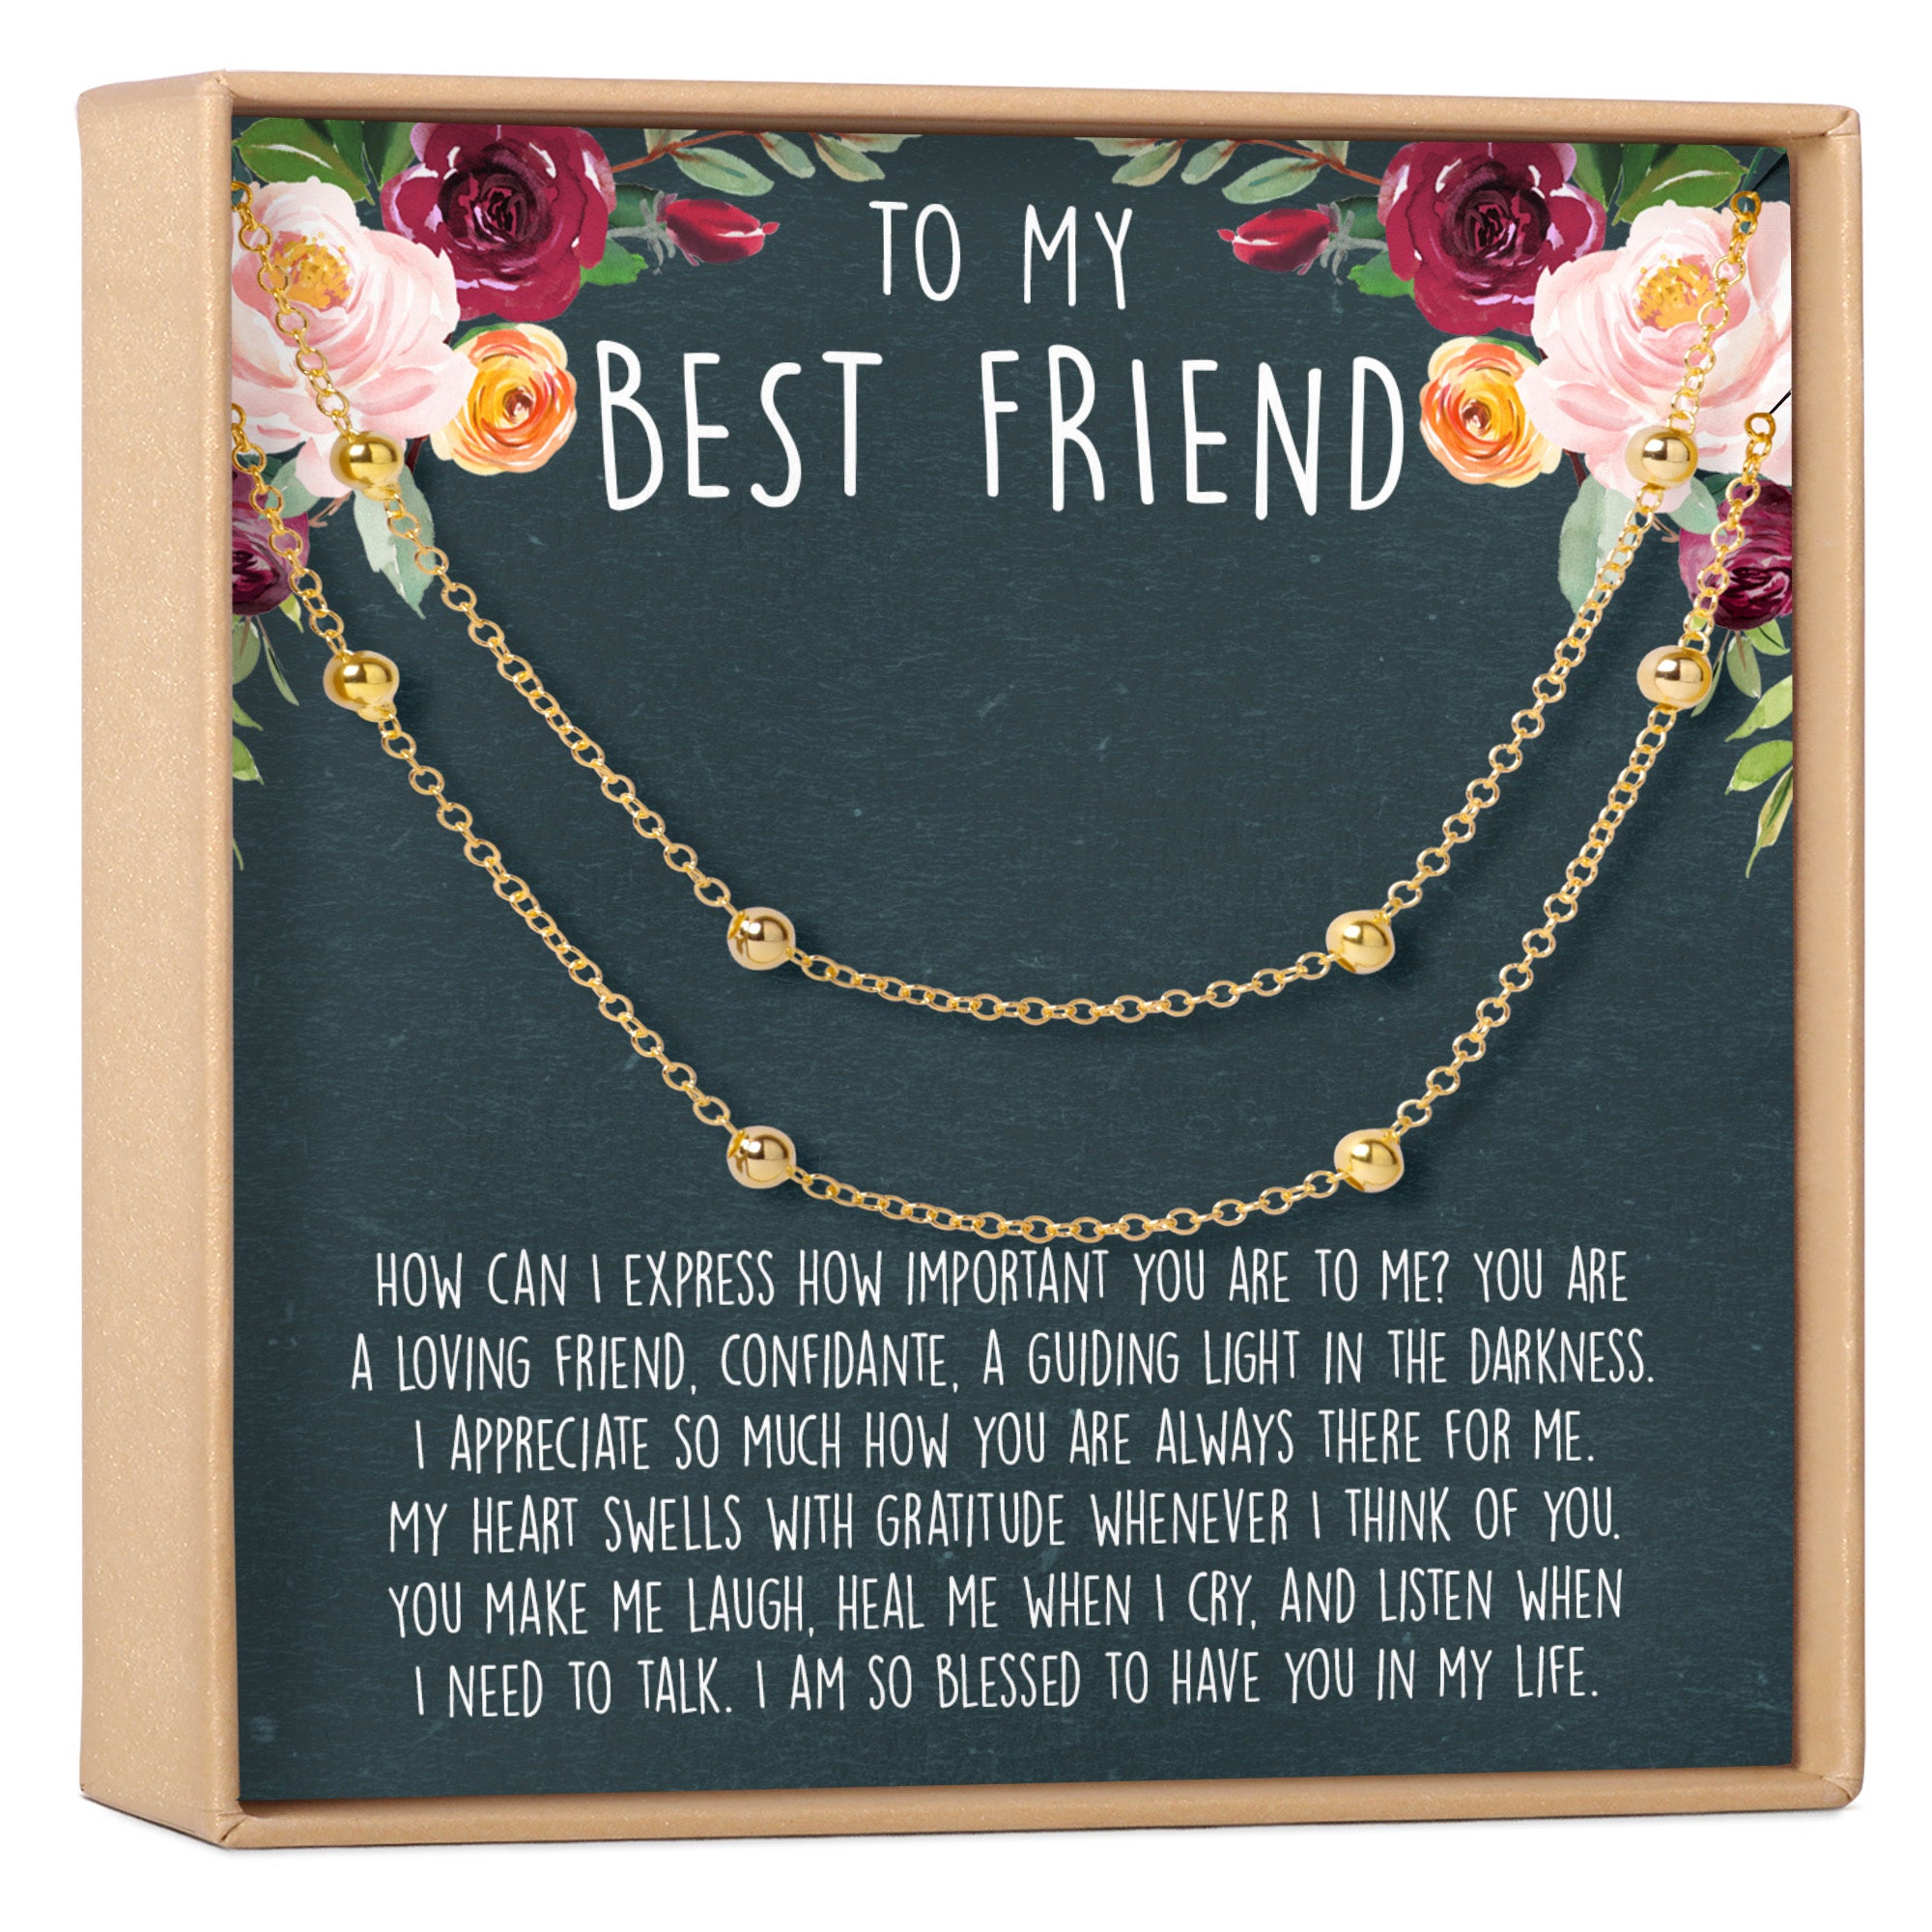 O que significa -You're my best friend, and I appreciate your